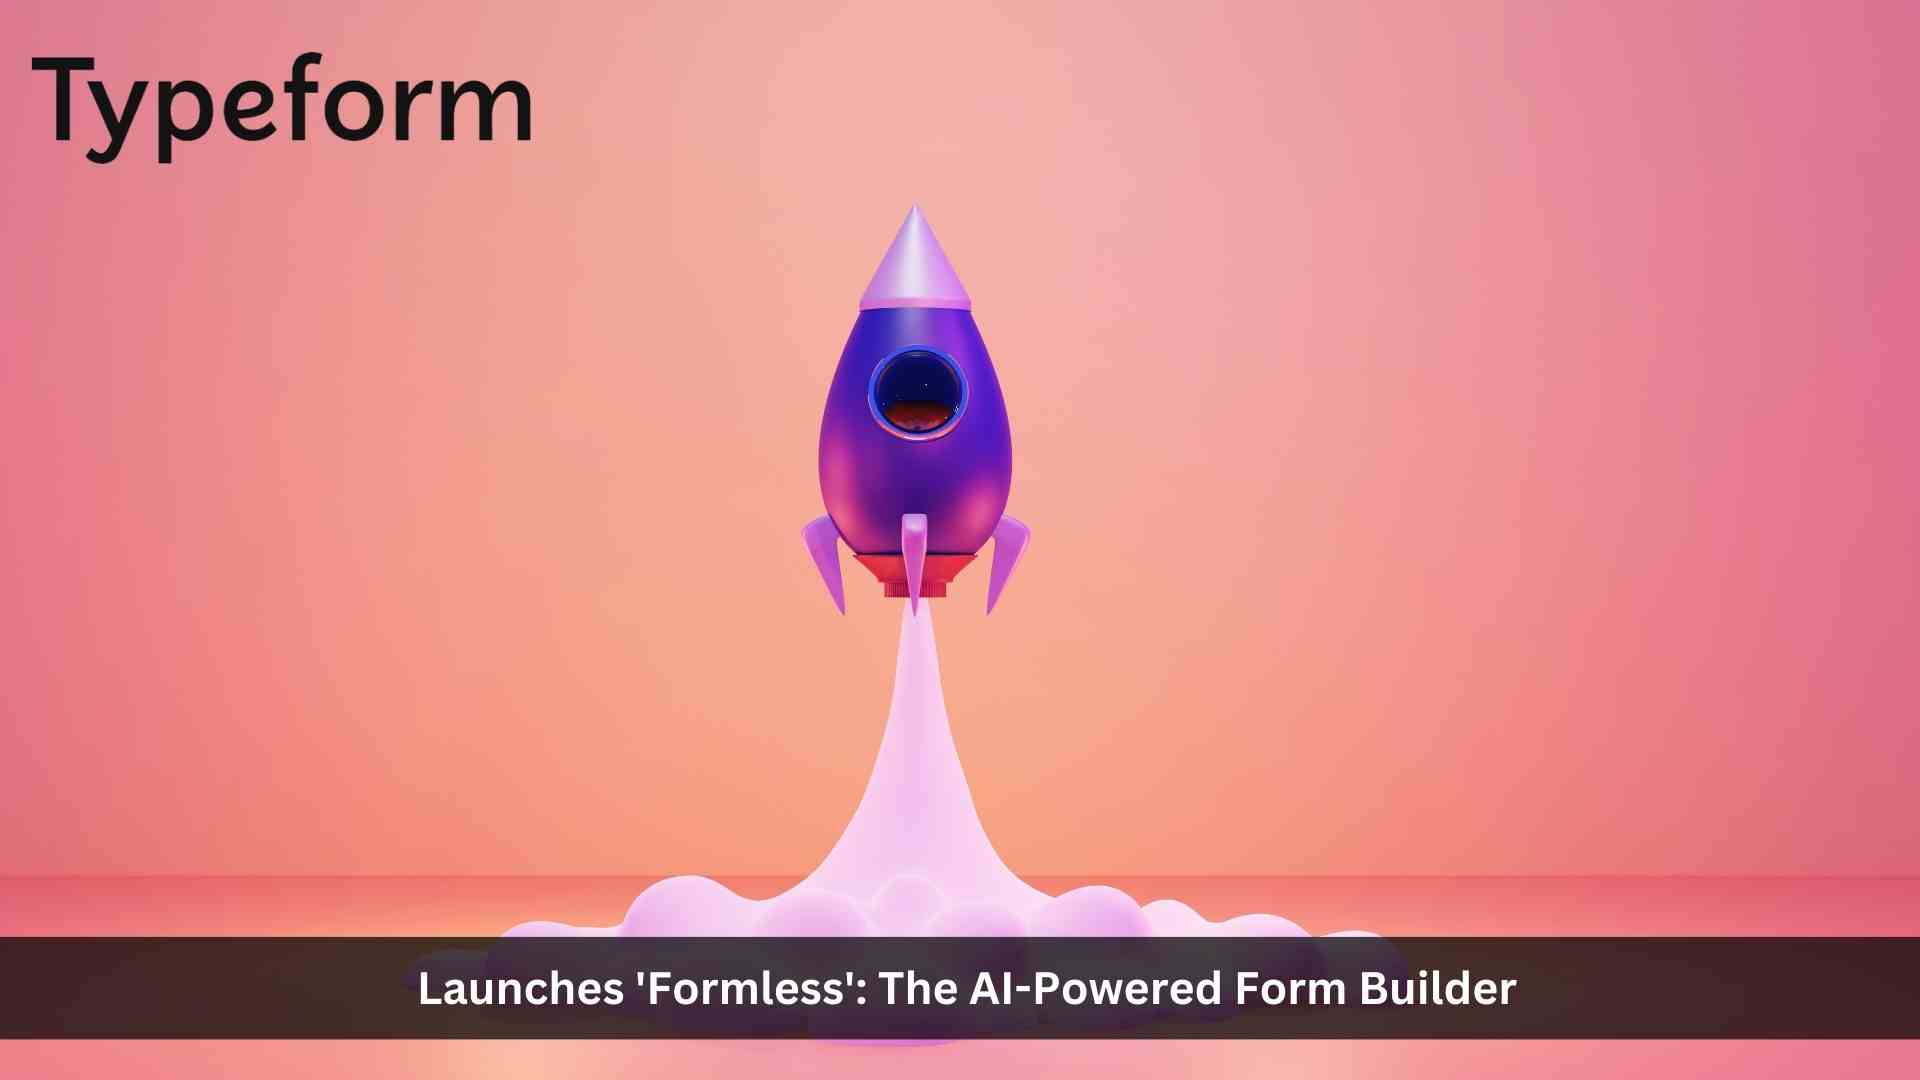 Typeform Launches 'Formless': The AI-Powered Form Builder That Simulates Real Conversations